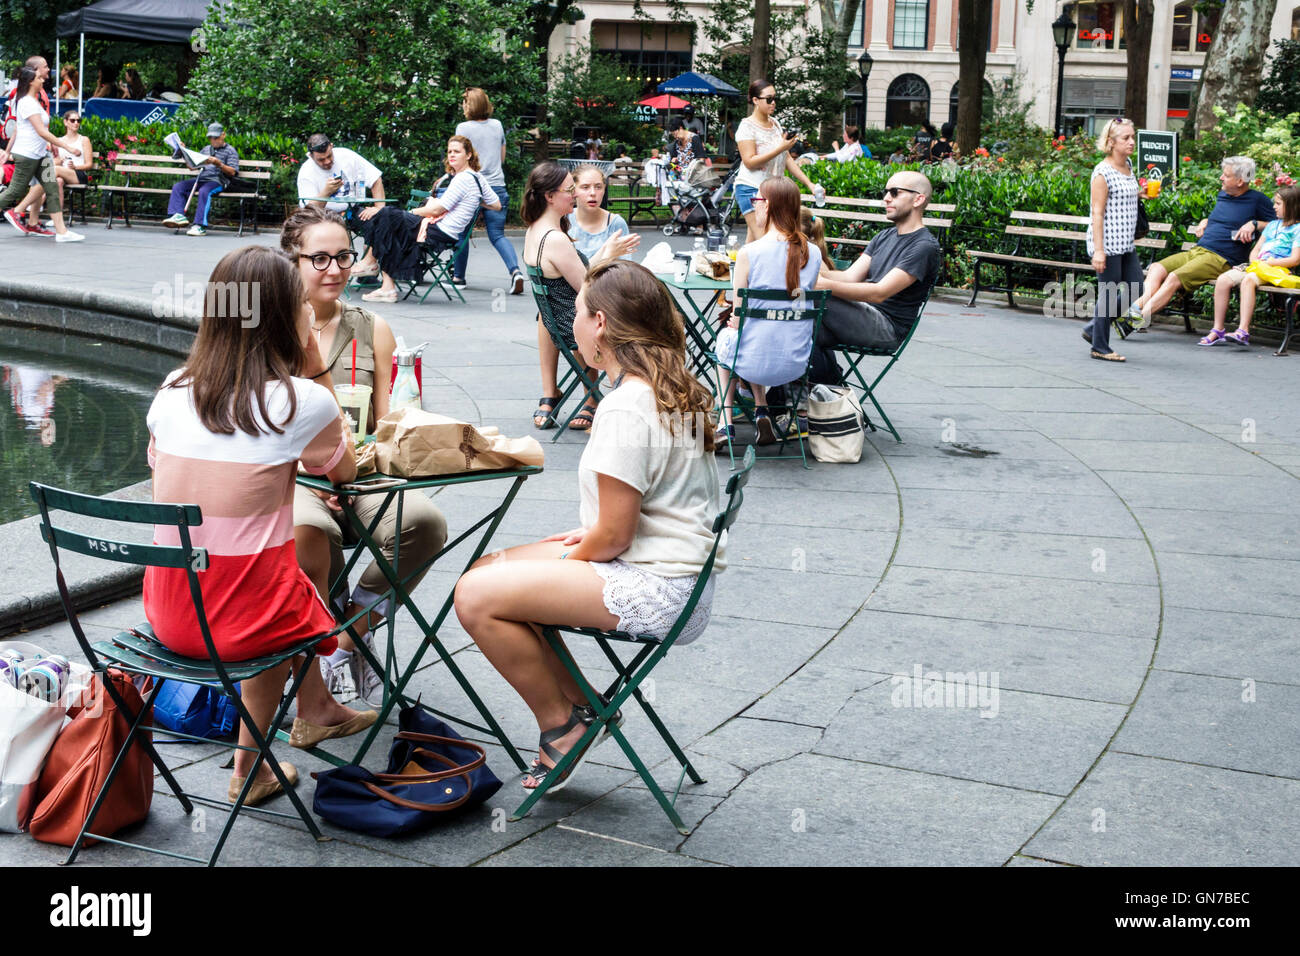 New York City,NY NYC,Manhattan,Madison Square Park,garden,outdoor space,bench,adult adults,woman women female lady,girl girls,youngster youngsters you Stock Photo